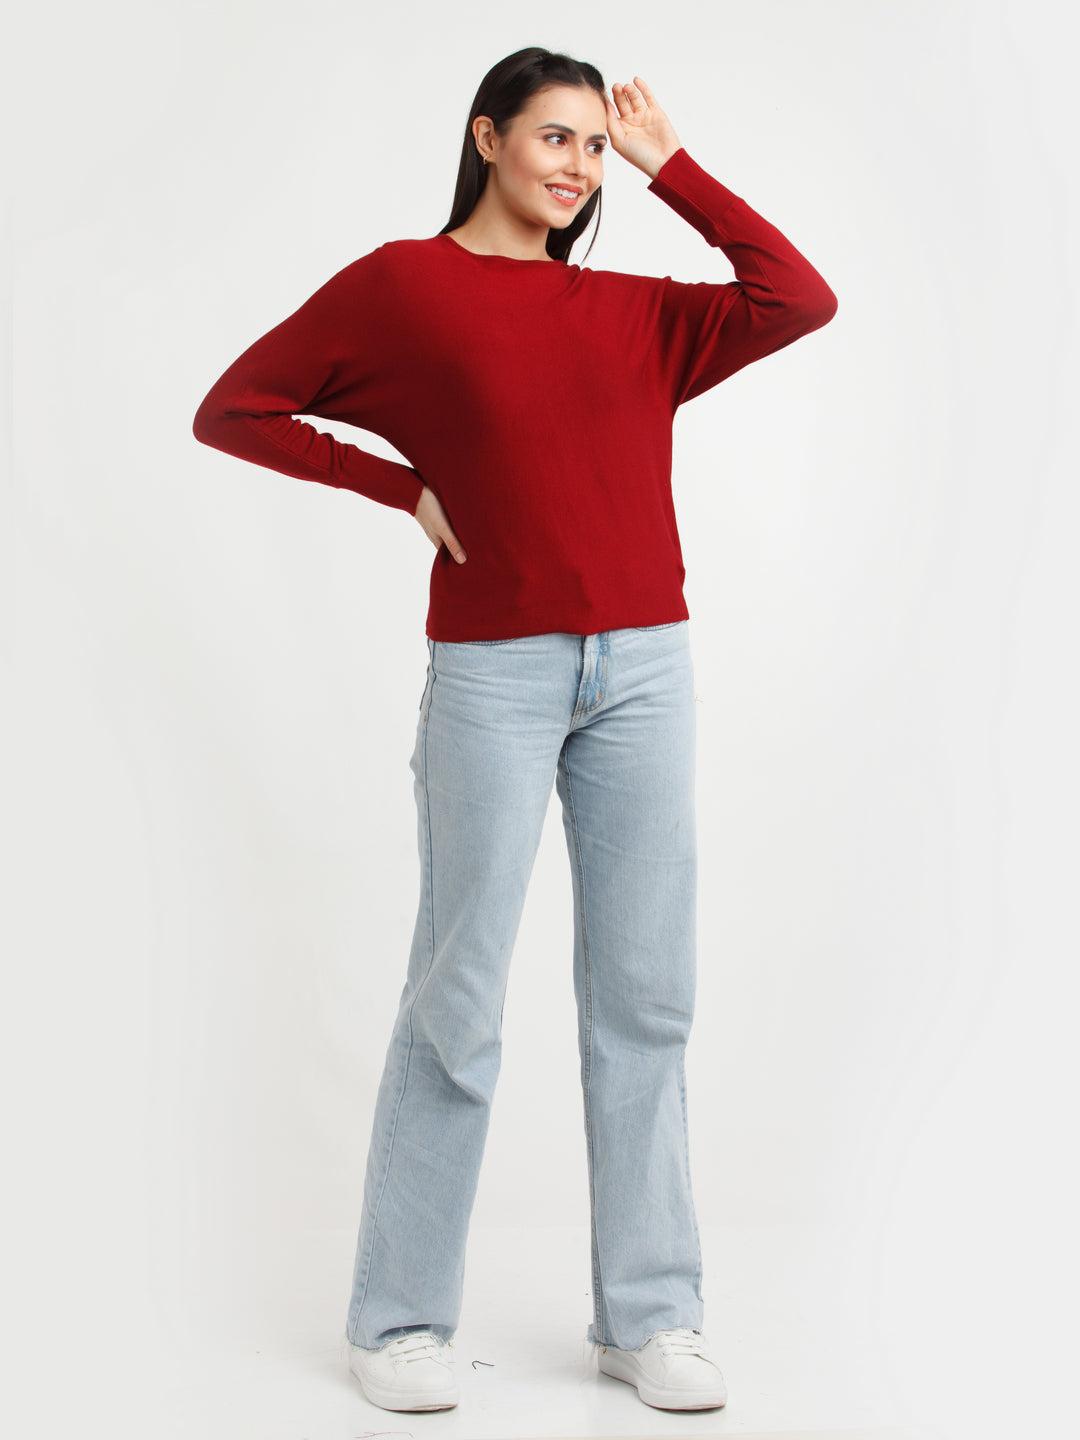 Maroon Solid Sweater For Women By Zink London